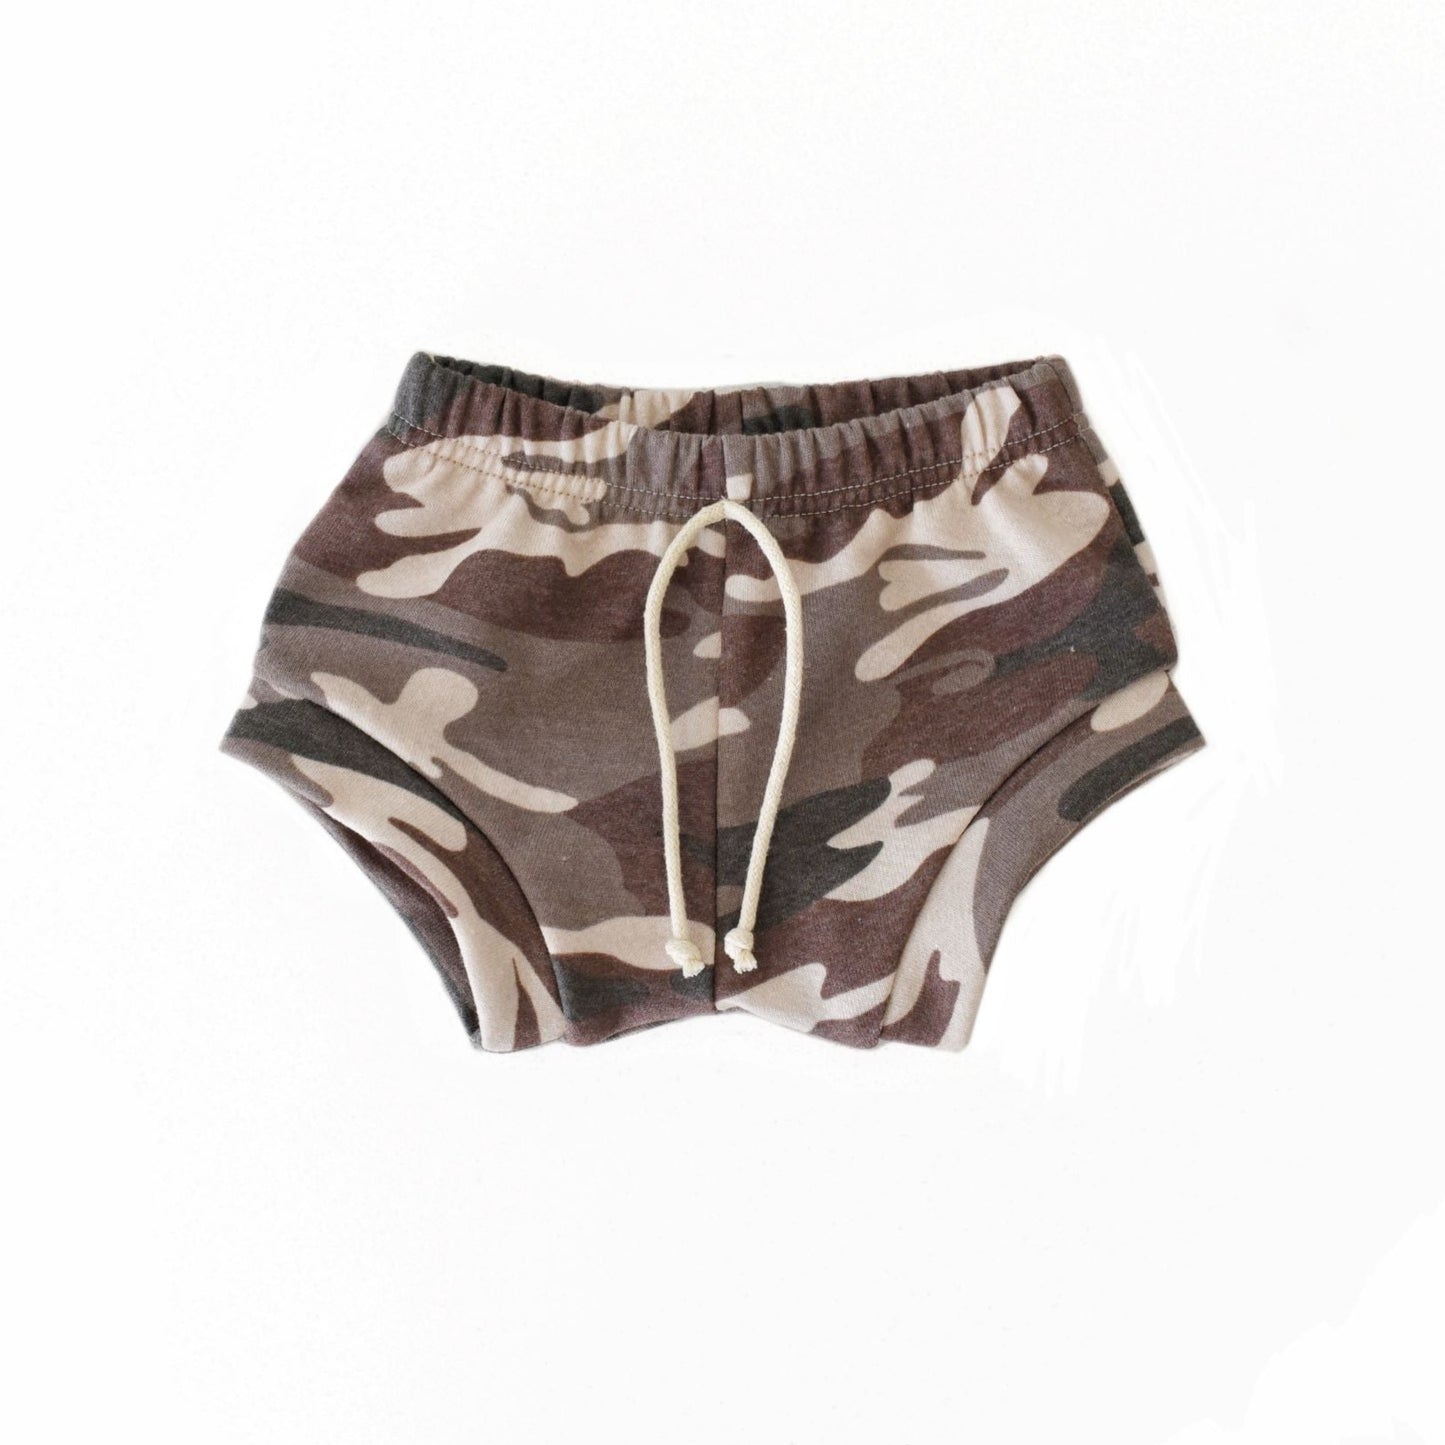 shorties - brown camo (SEE SIZING NOTE)